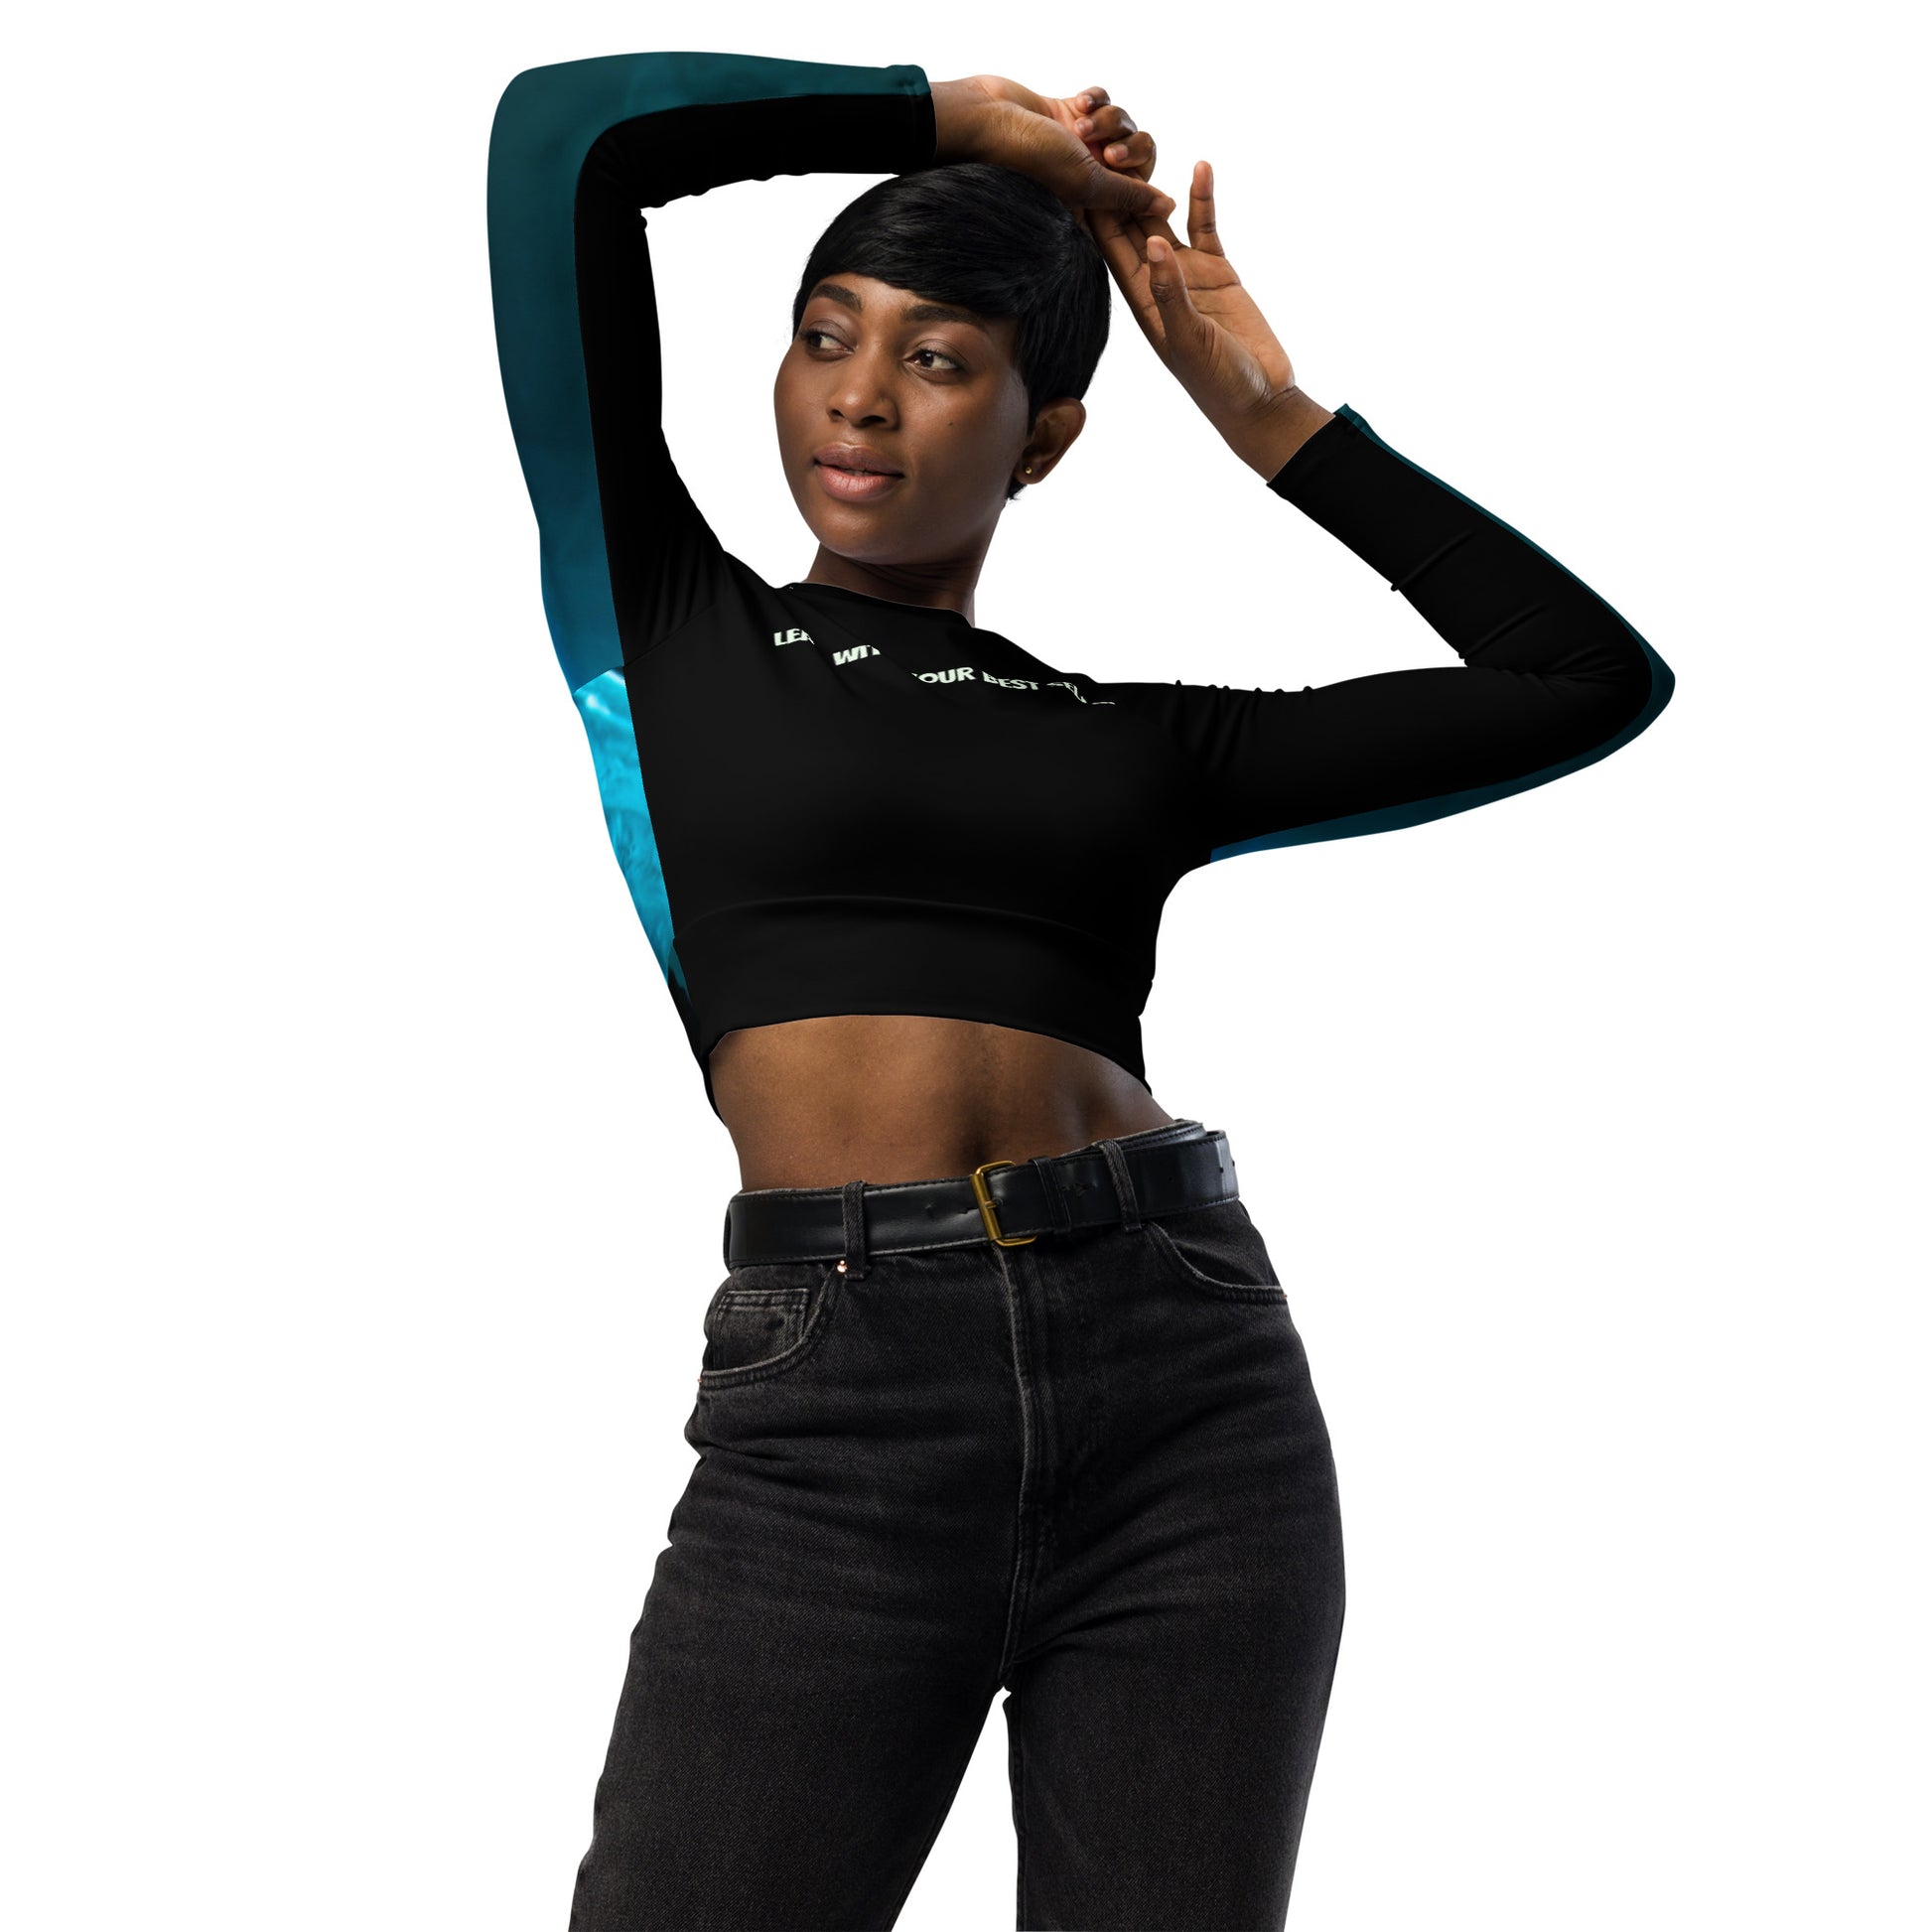 See yourself in the Spotlight in these LBS Aqua Long-Sleeve Crop Top for the Female Artist.